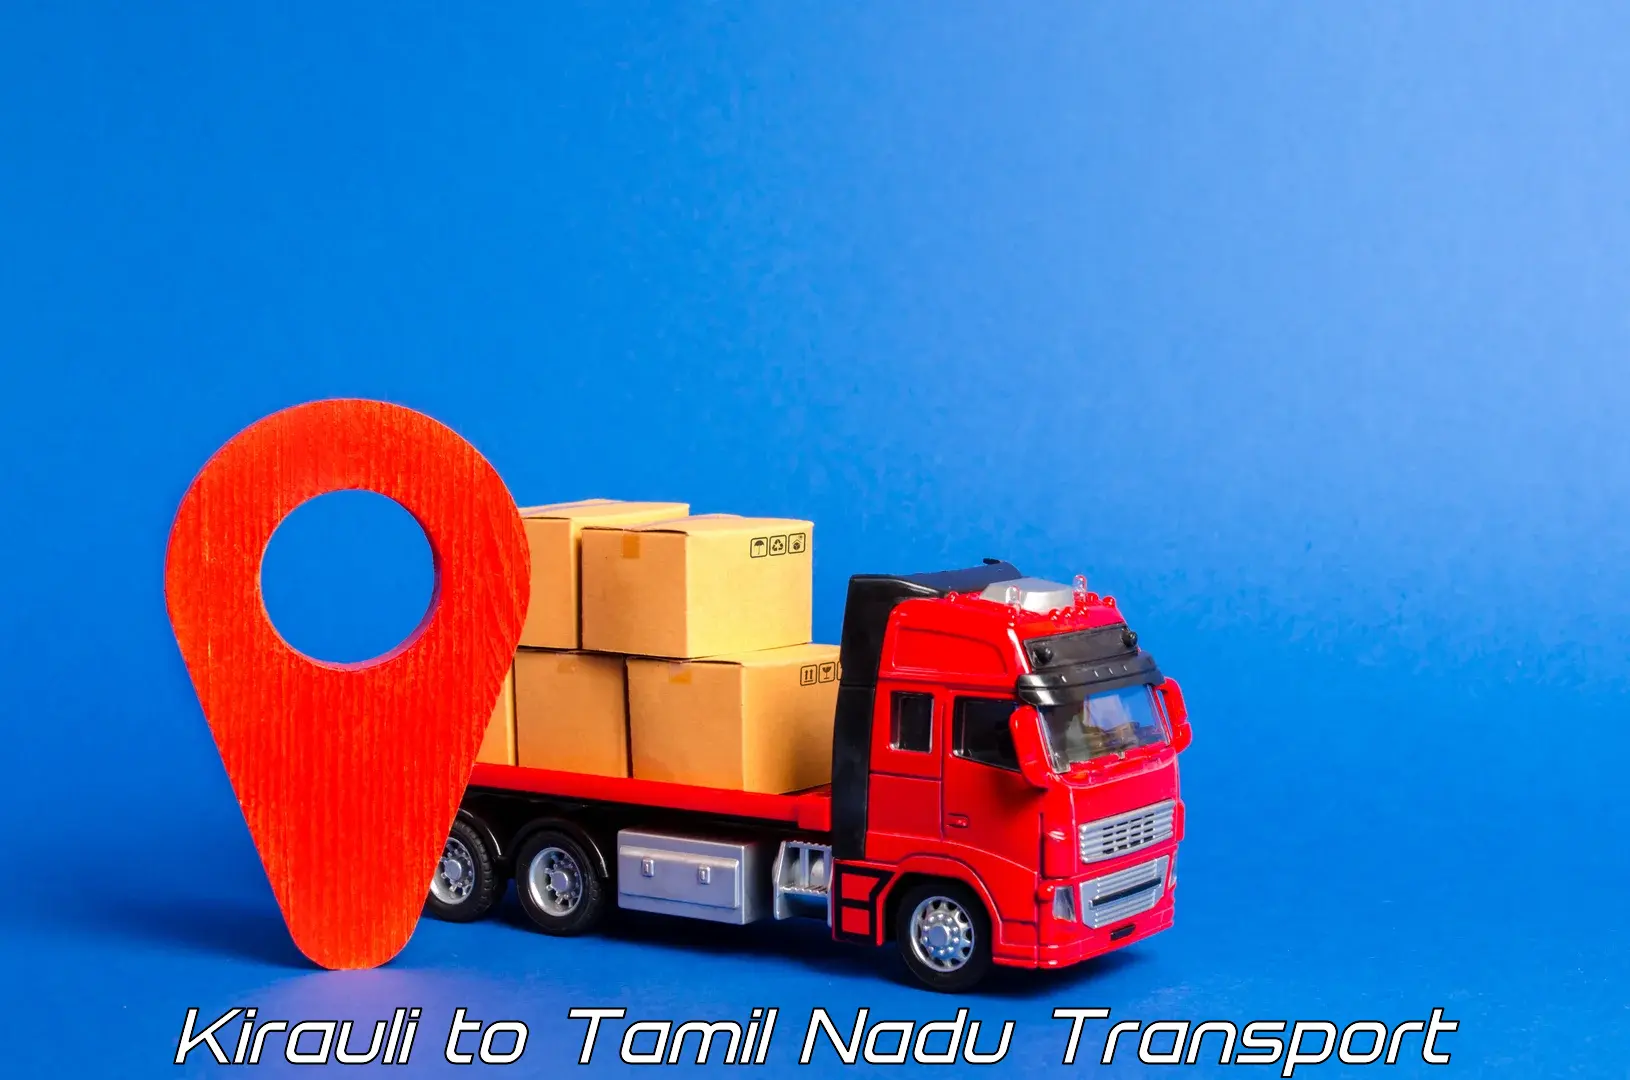 Container transport service Kirauli to Anthiyur